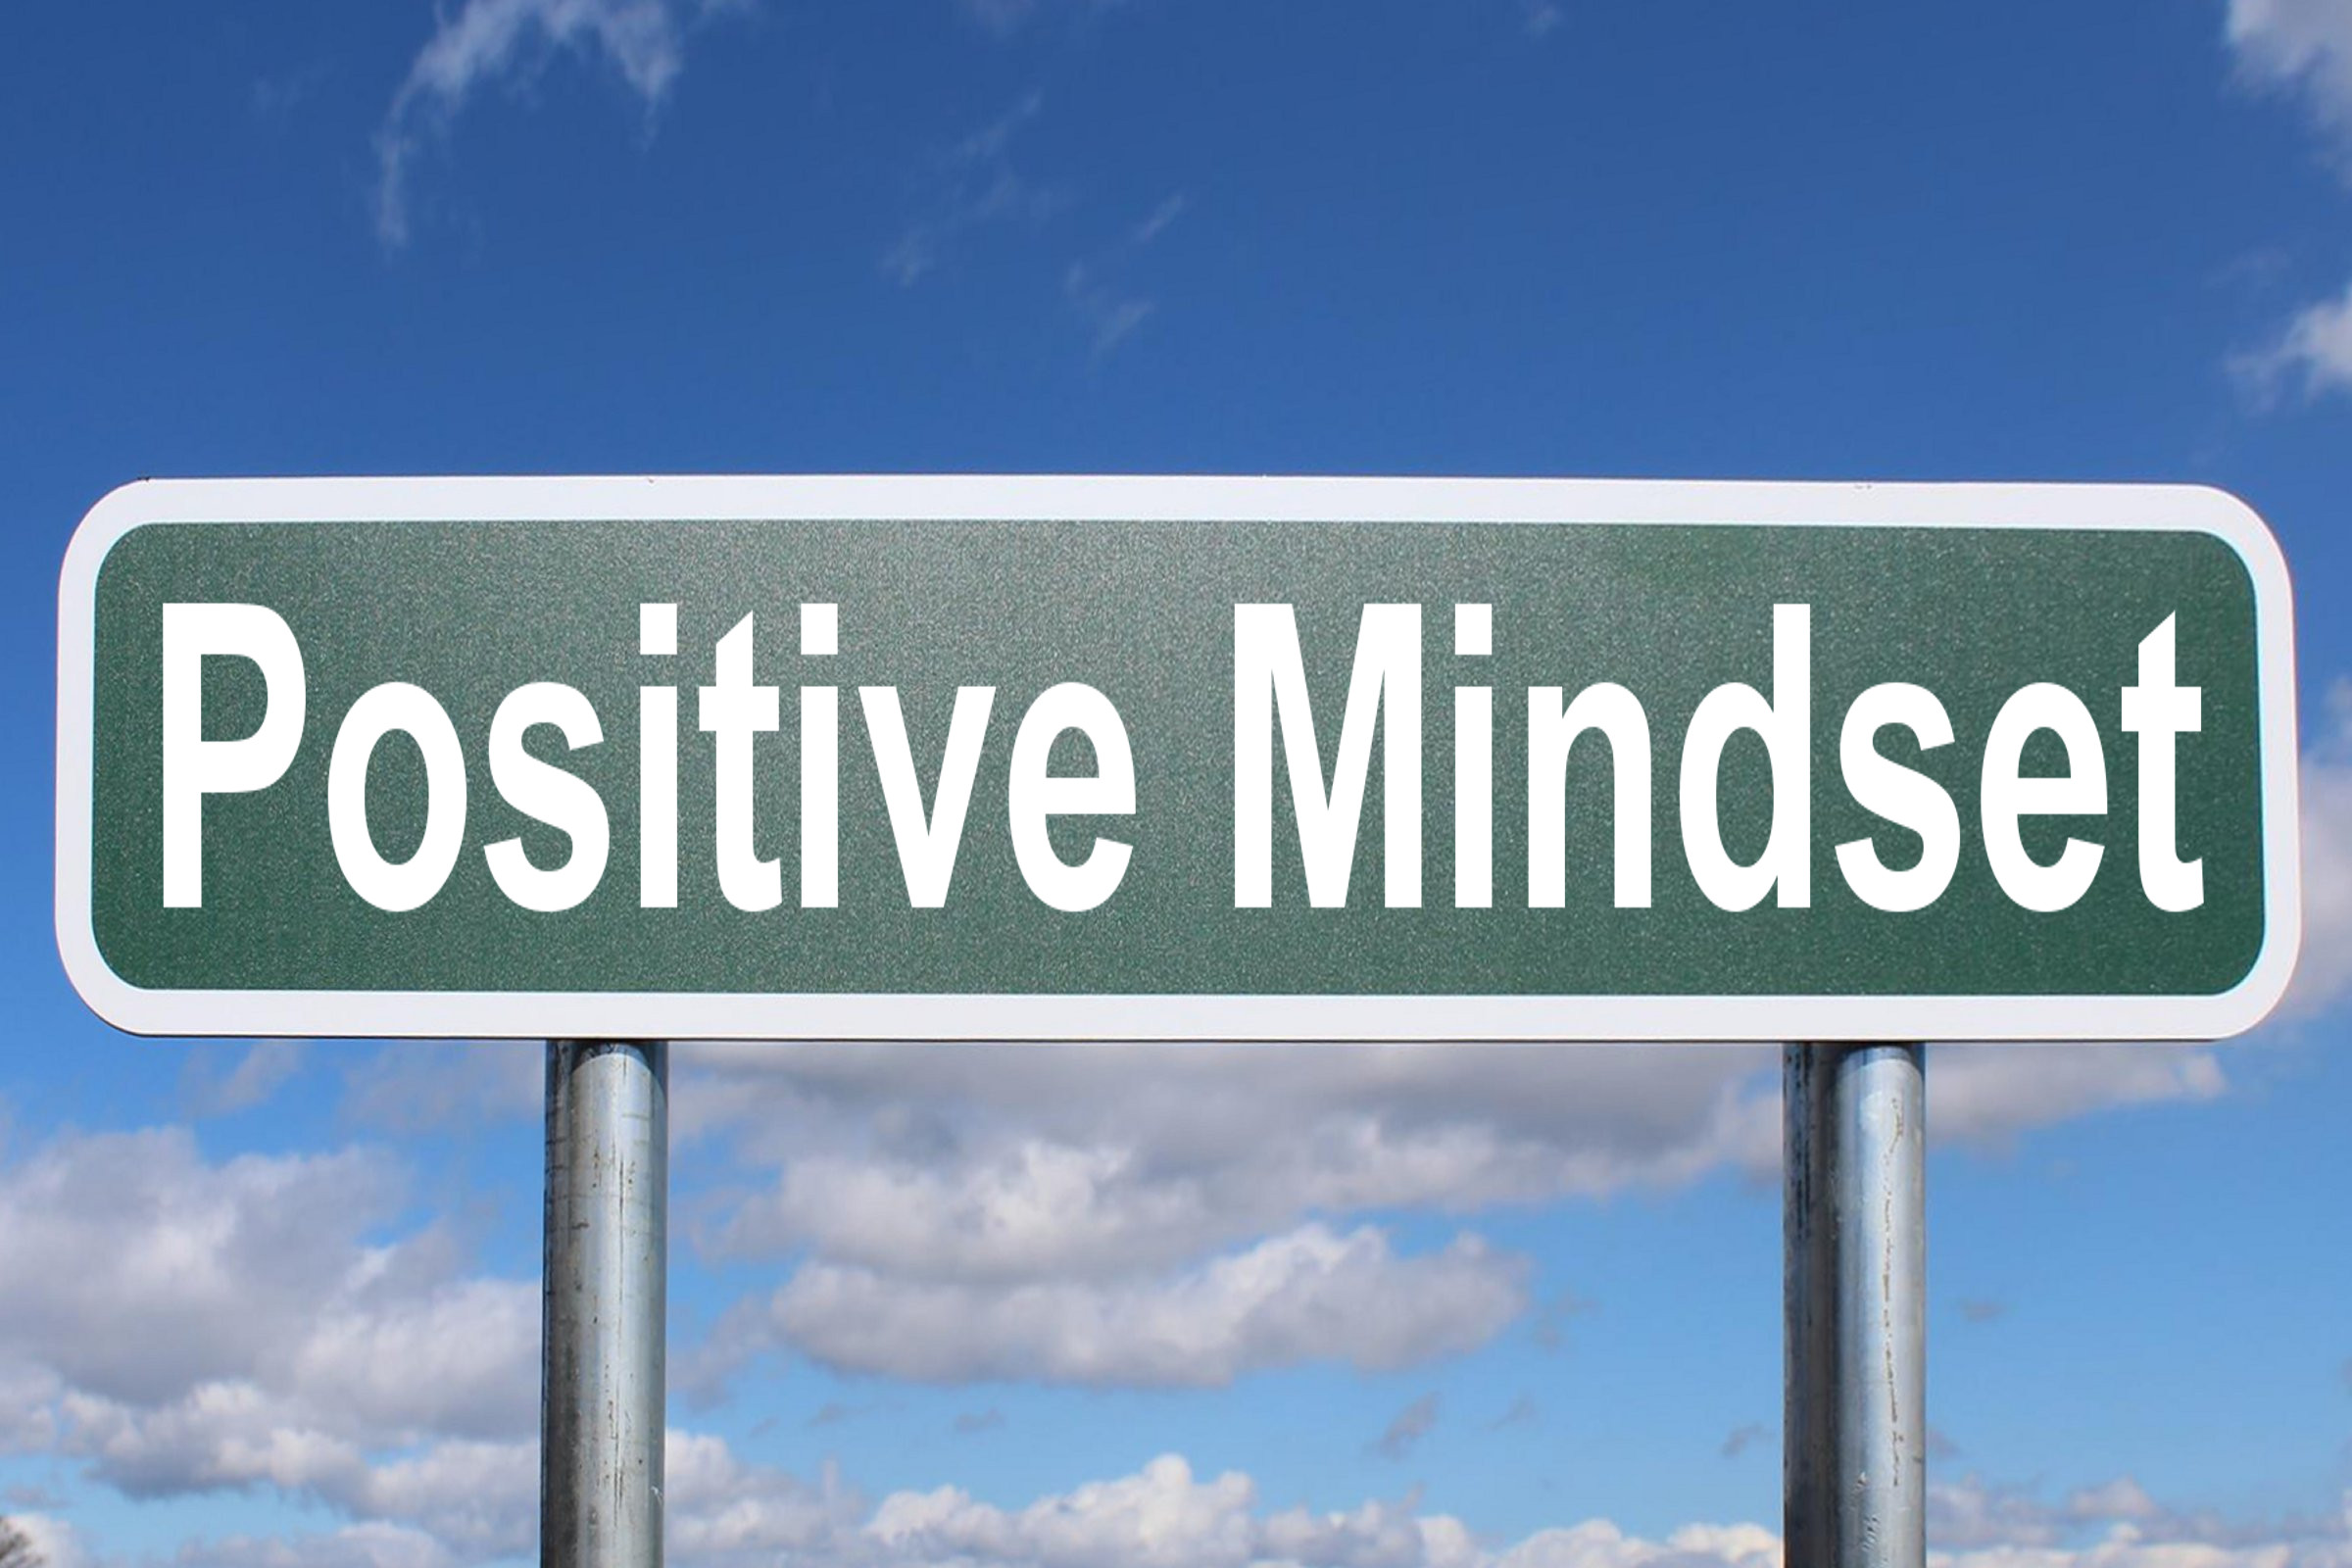 Positive Mindset Free of Charge Creative Commons Highway sign image